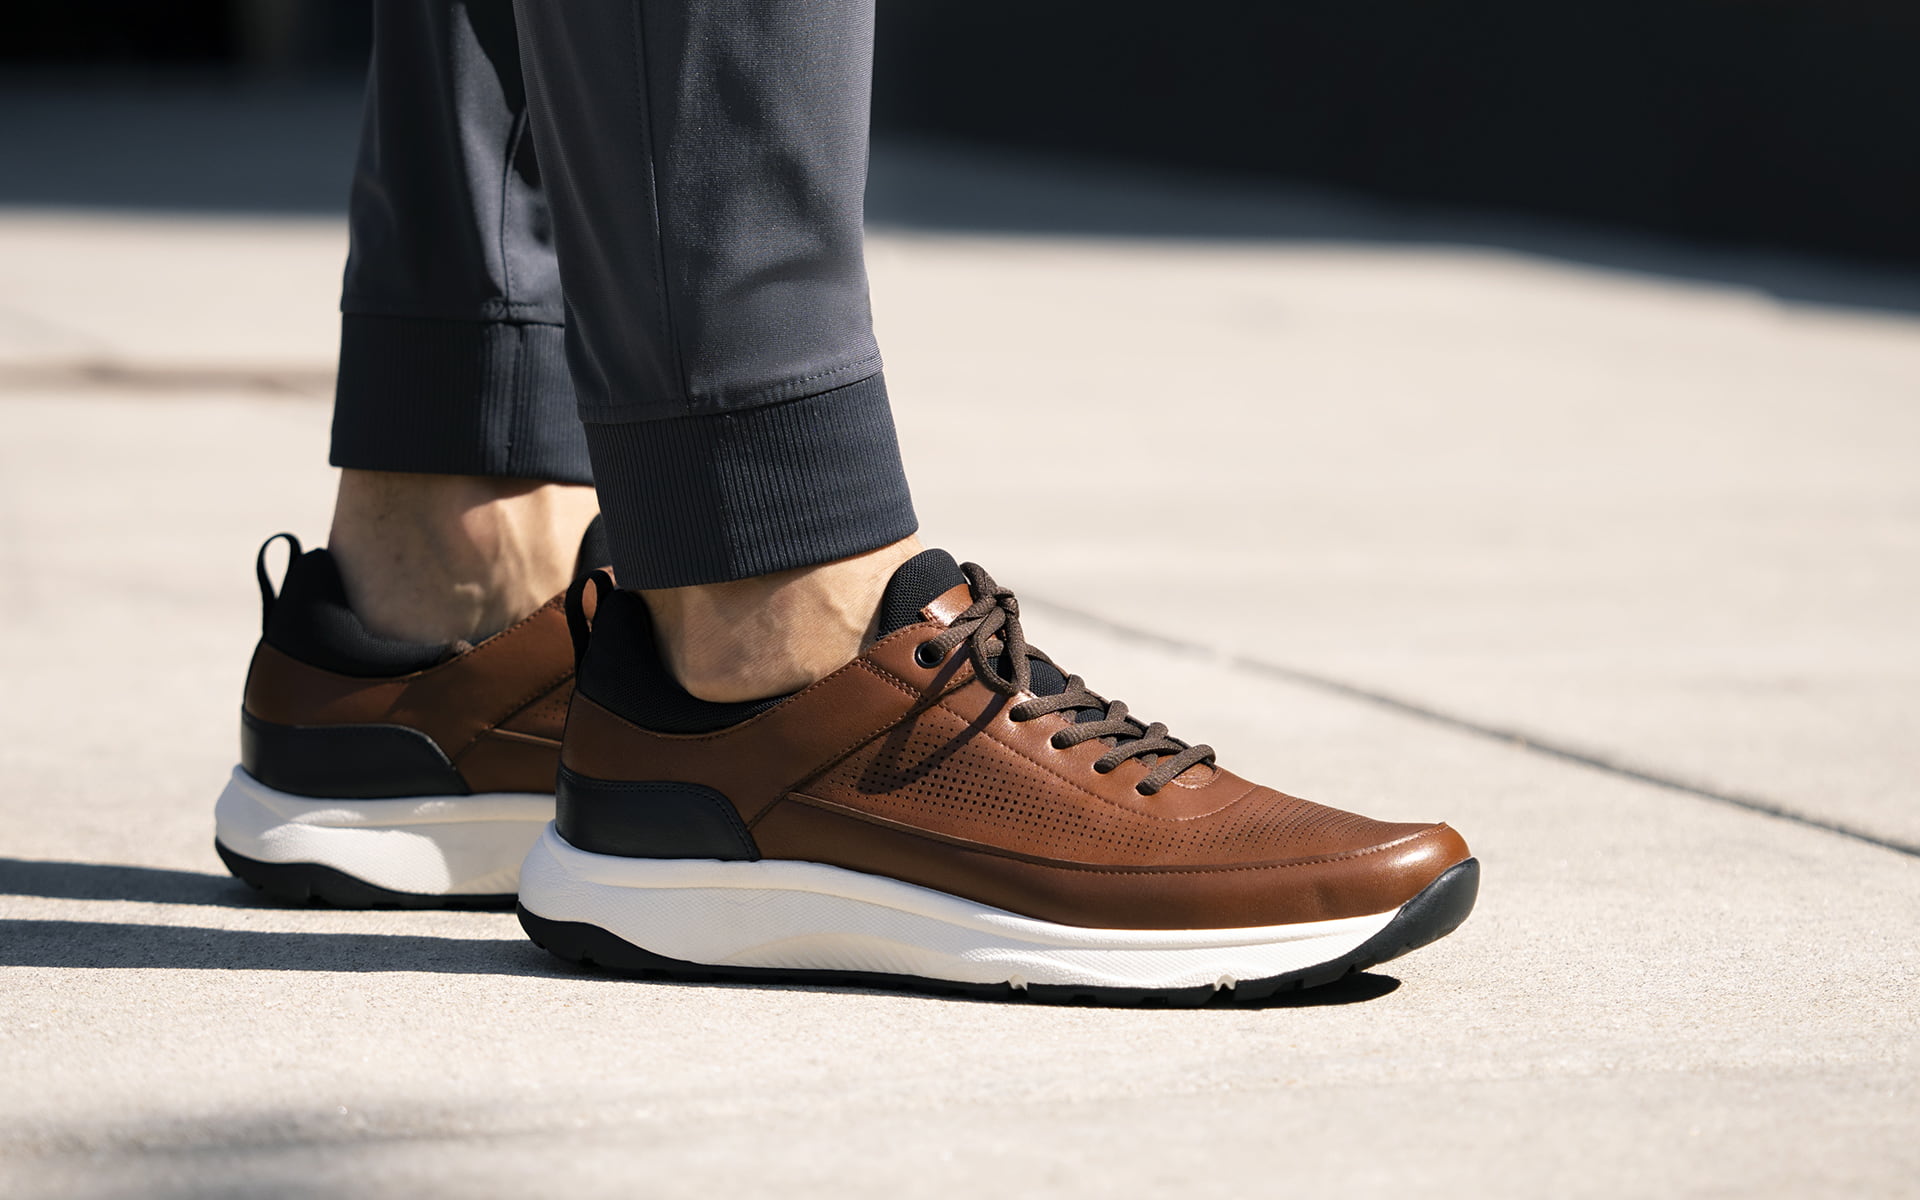 Click to shop the Florsheim Satellite collection. Image features the Satellite perf in cognac. 